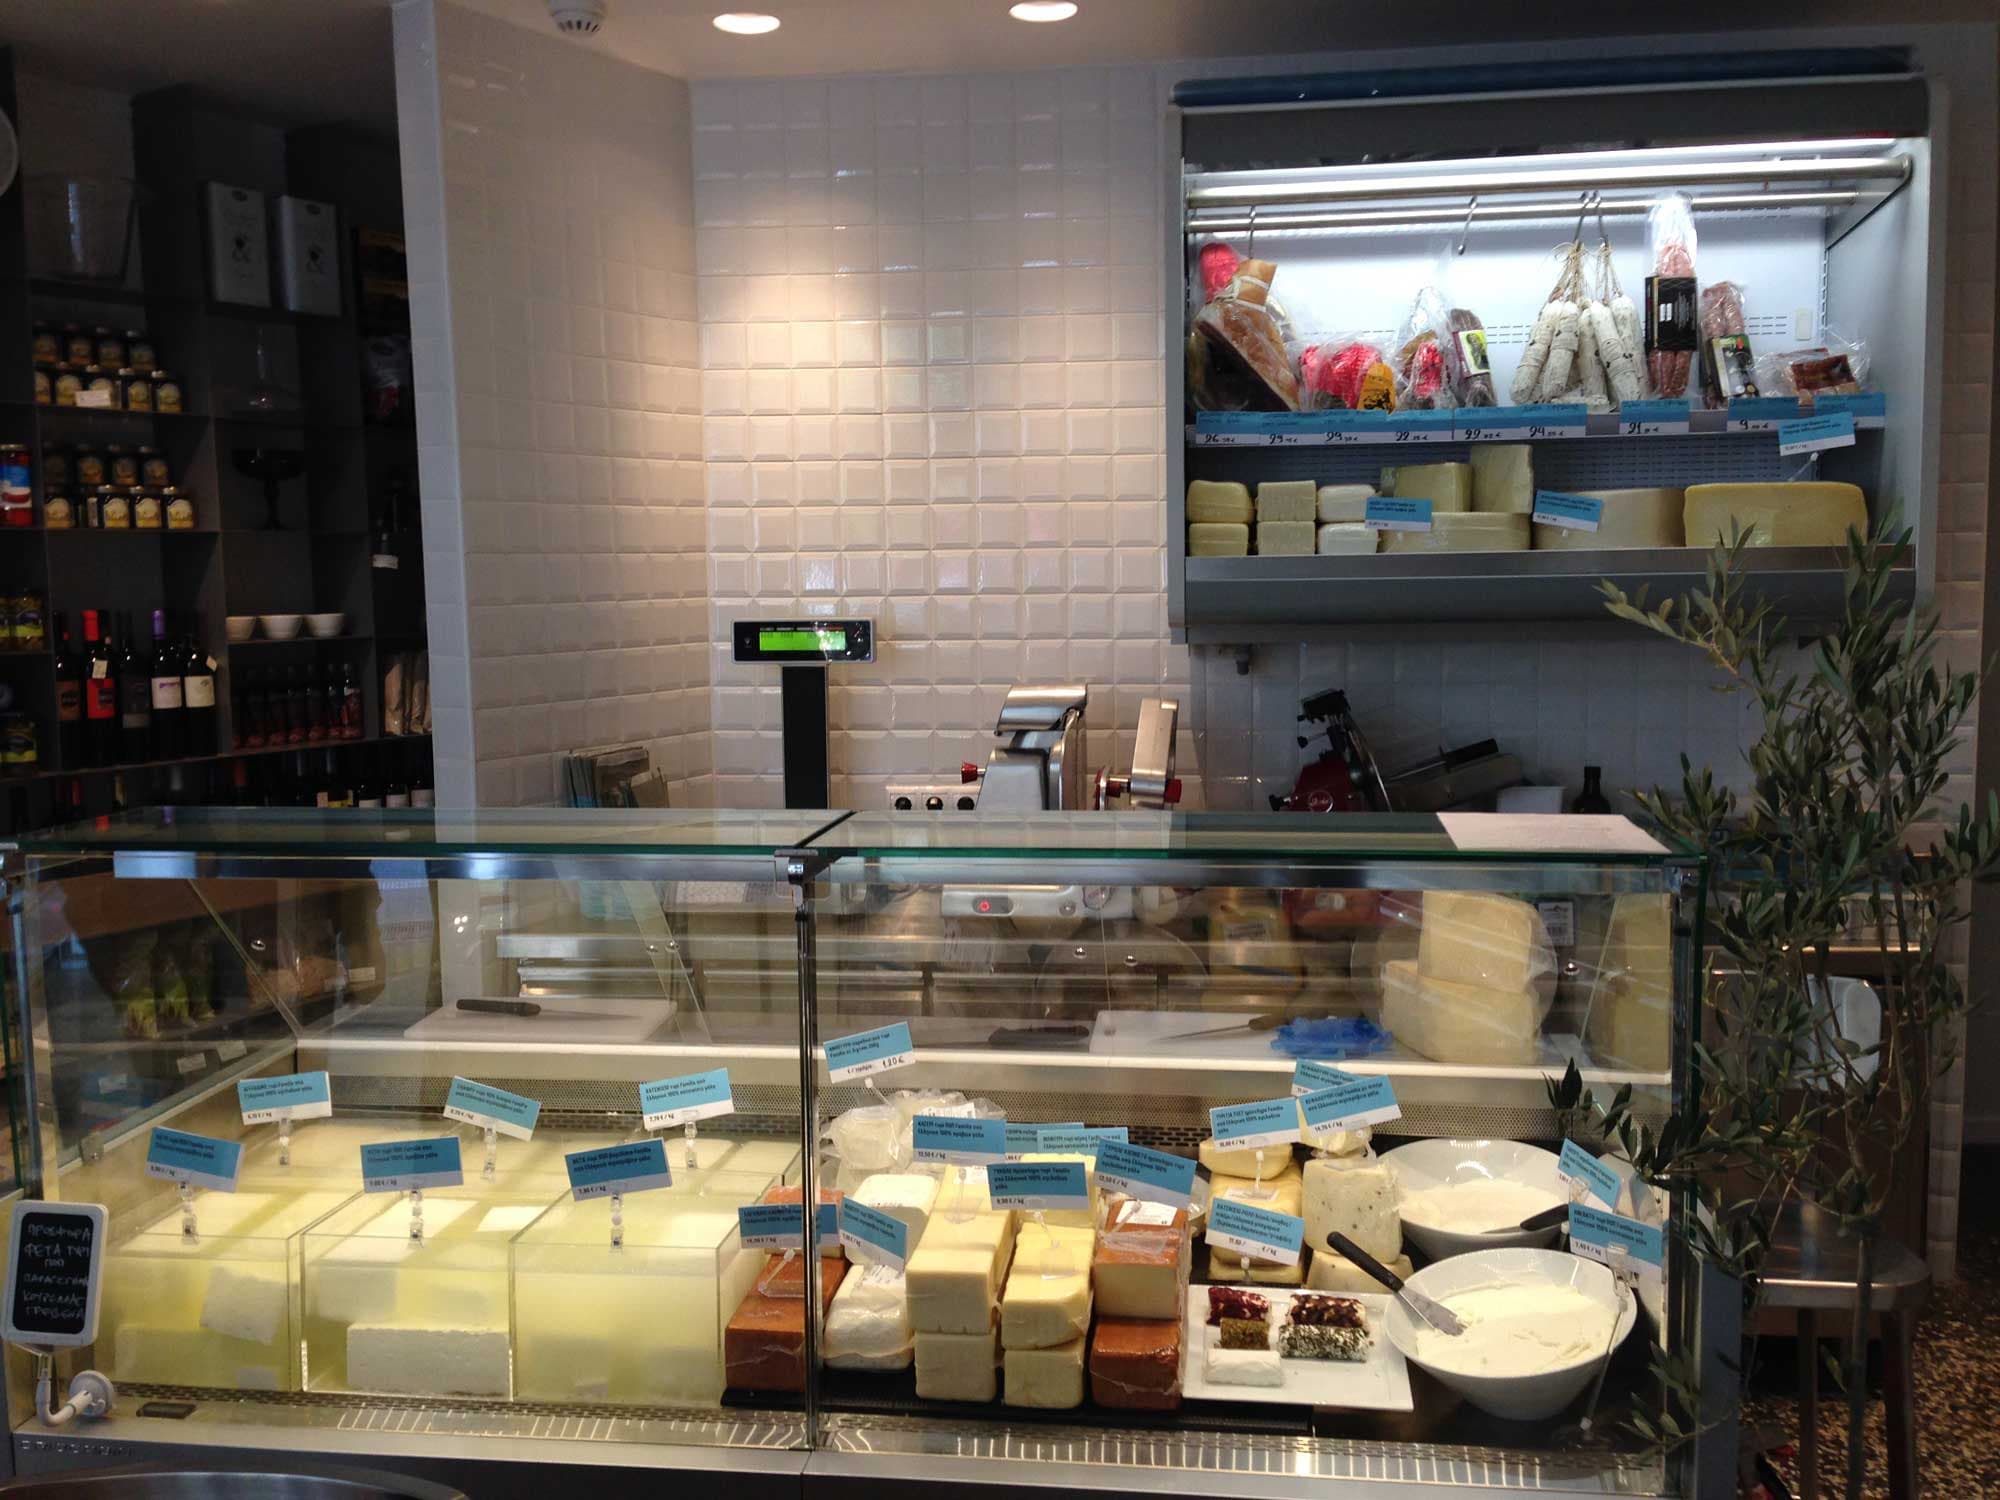 Behold: the cheese case